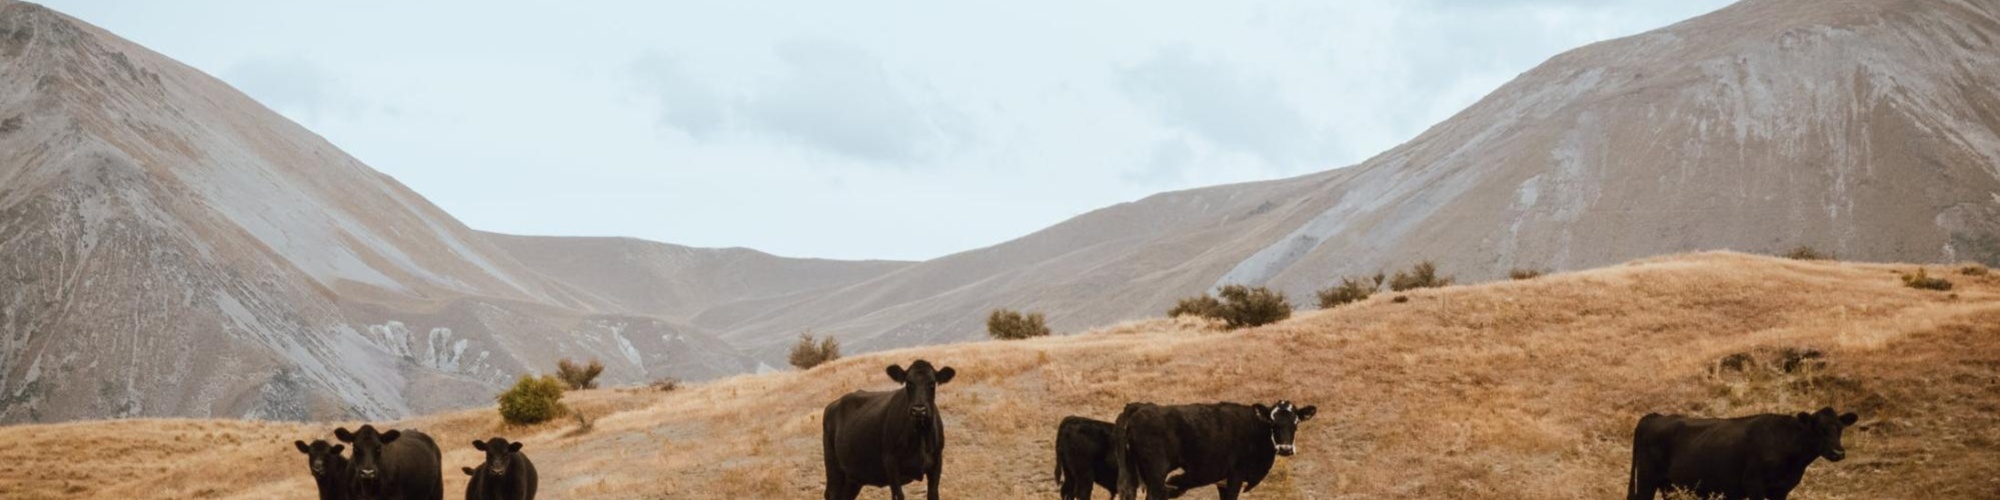 Black cows stand on a brown grassy hillside with mountains in the background